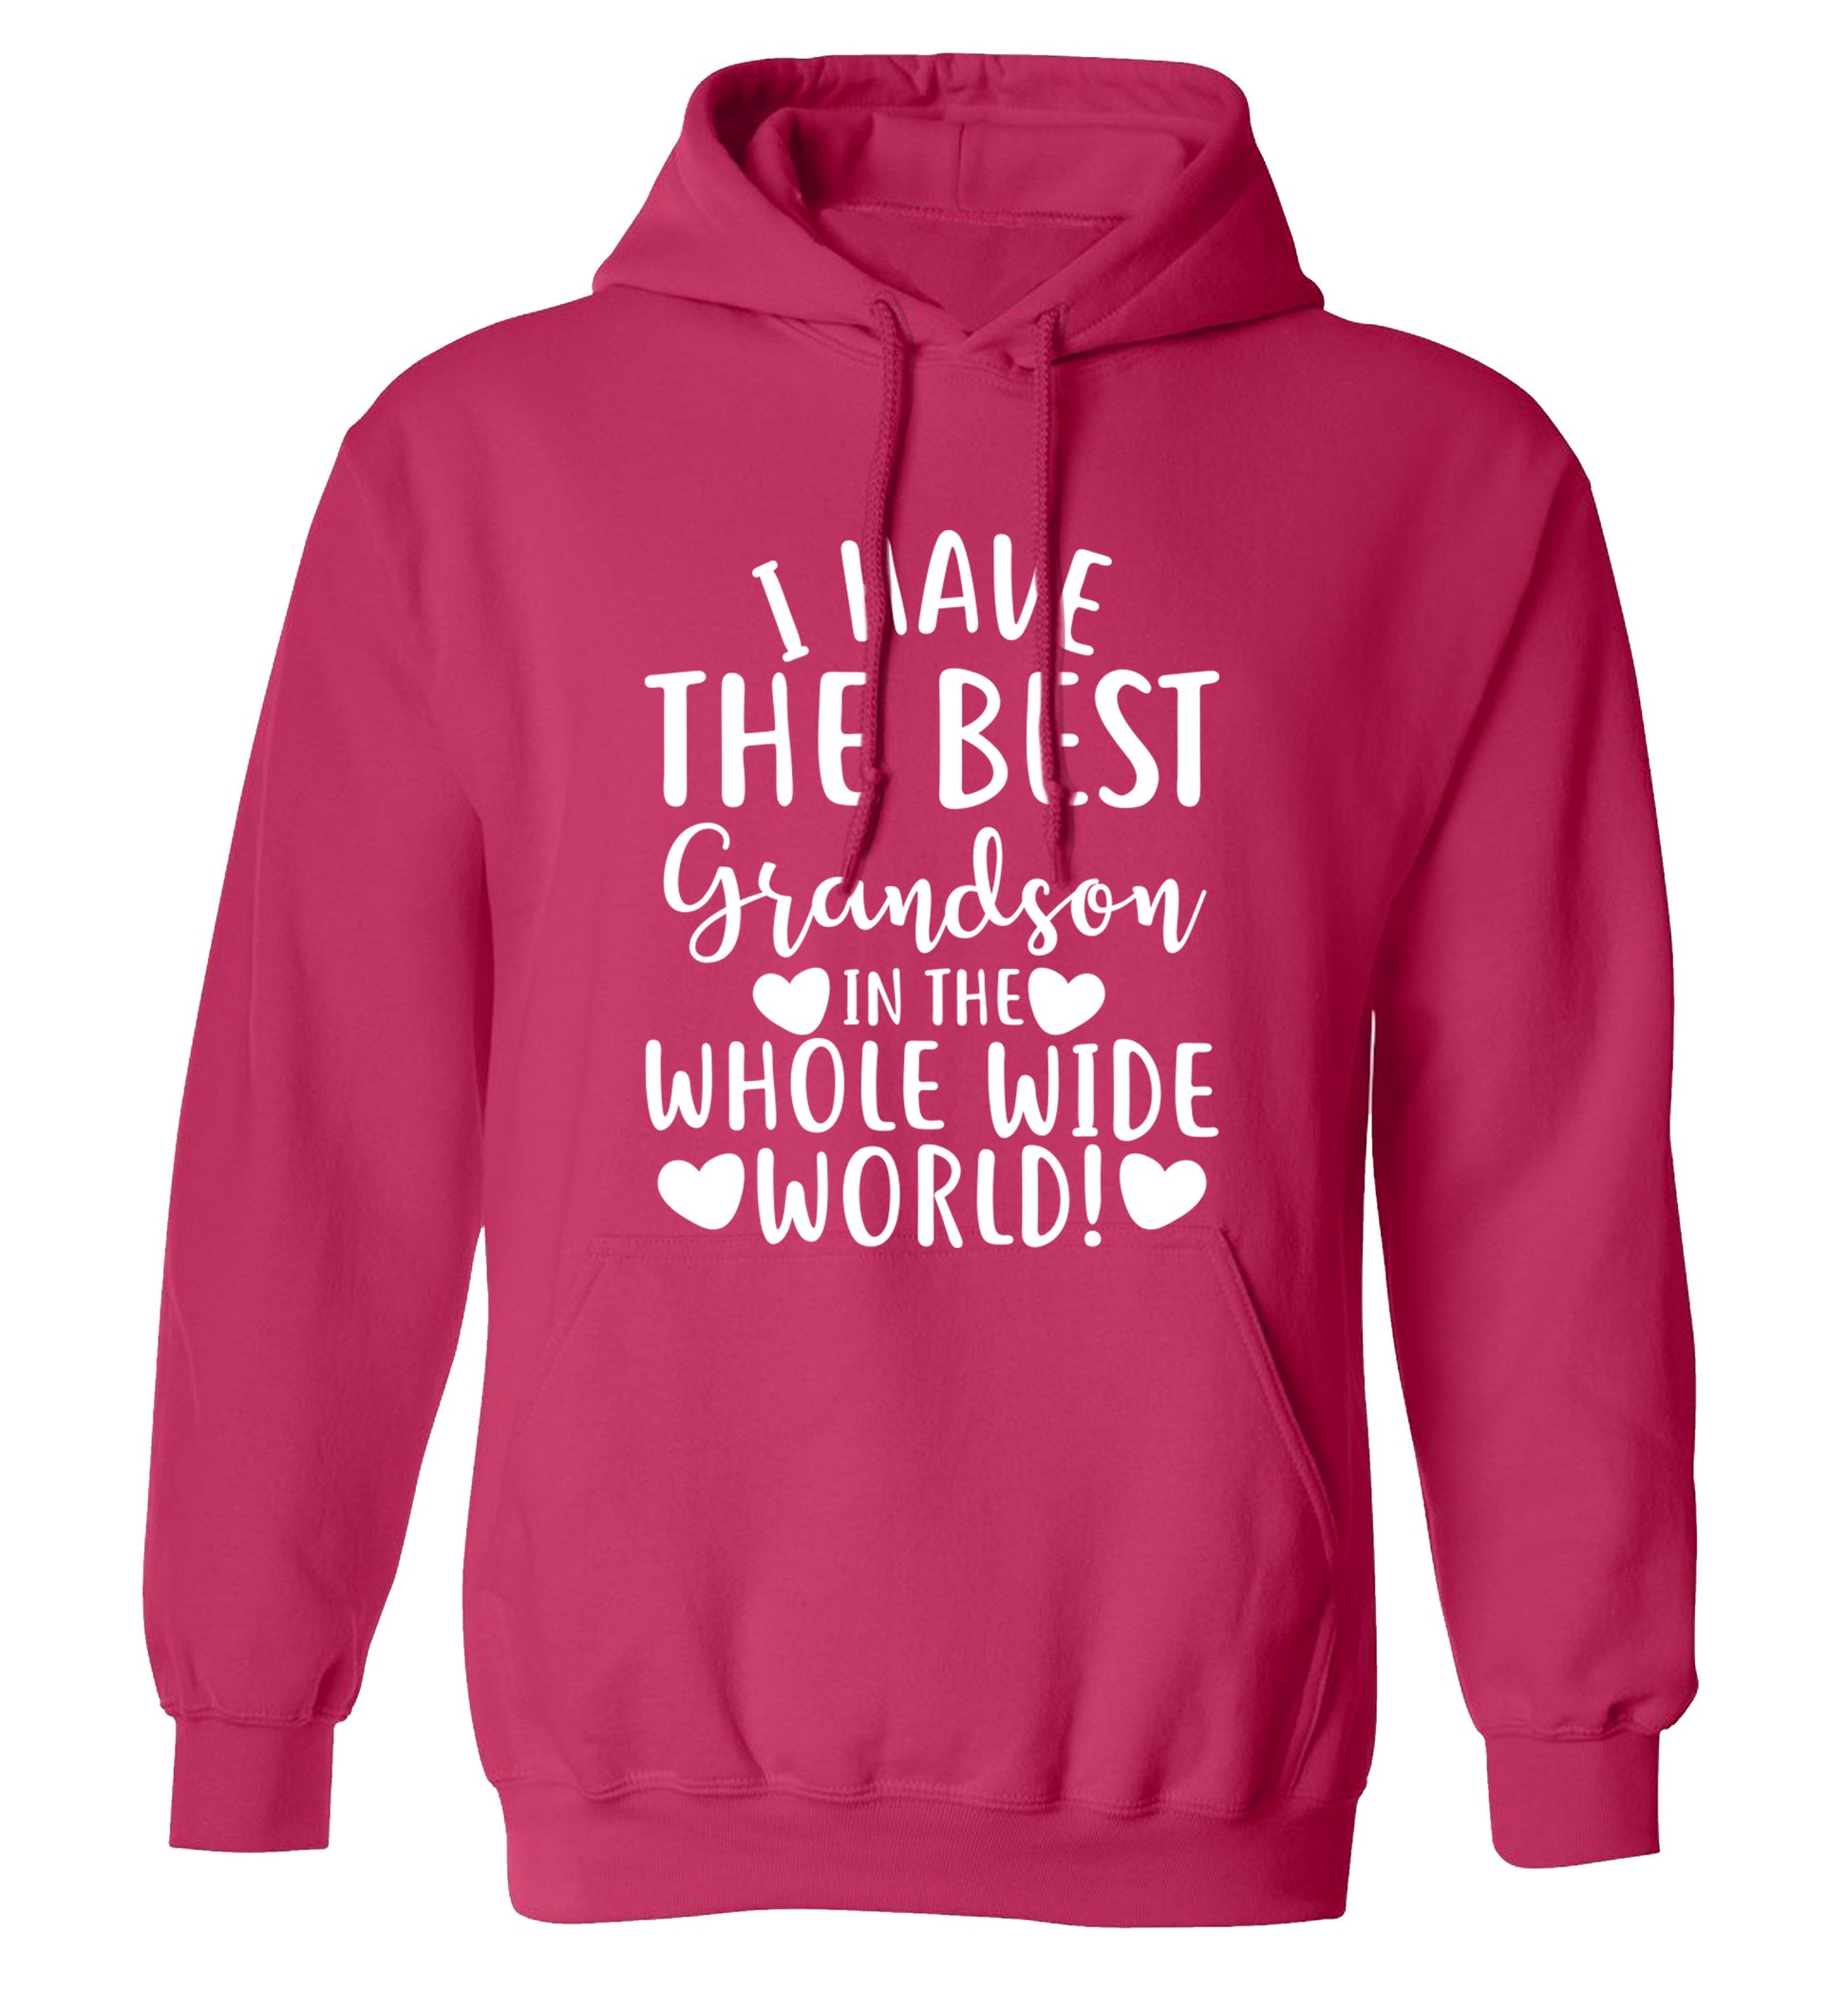 I have the best grandson in the whole wide world! adults unisex pink hoodie 2XL